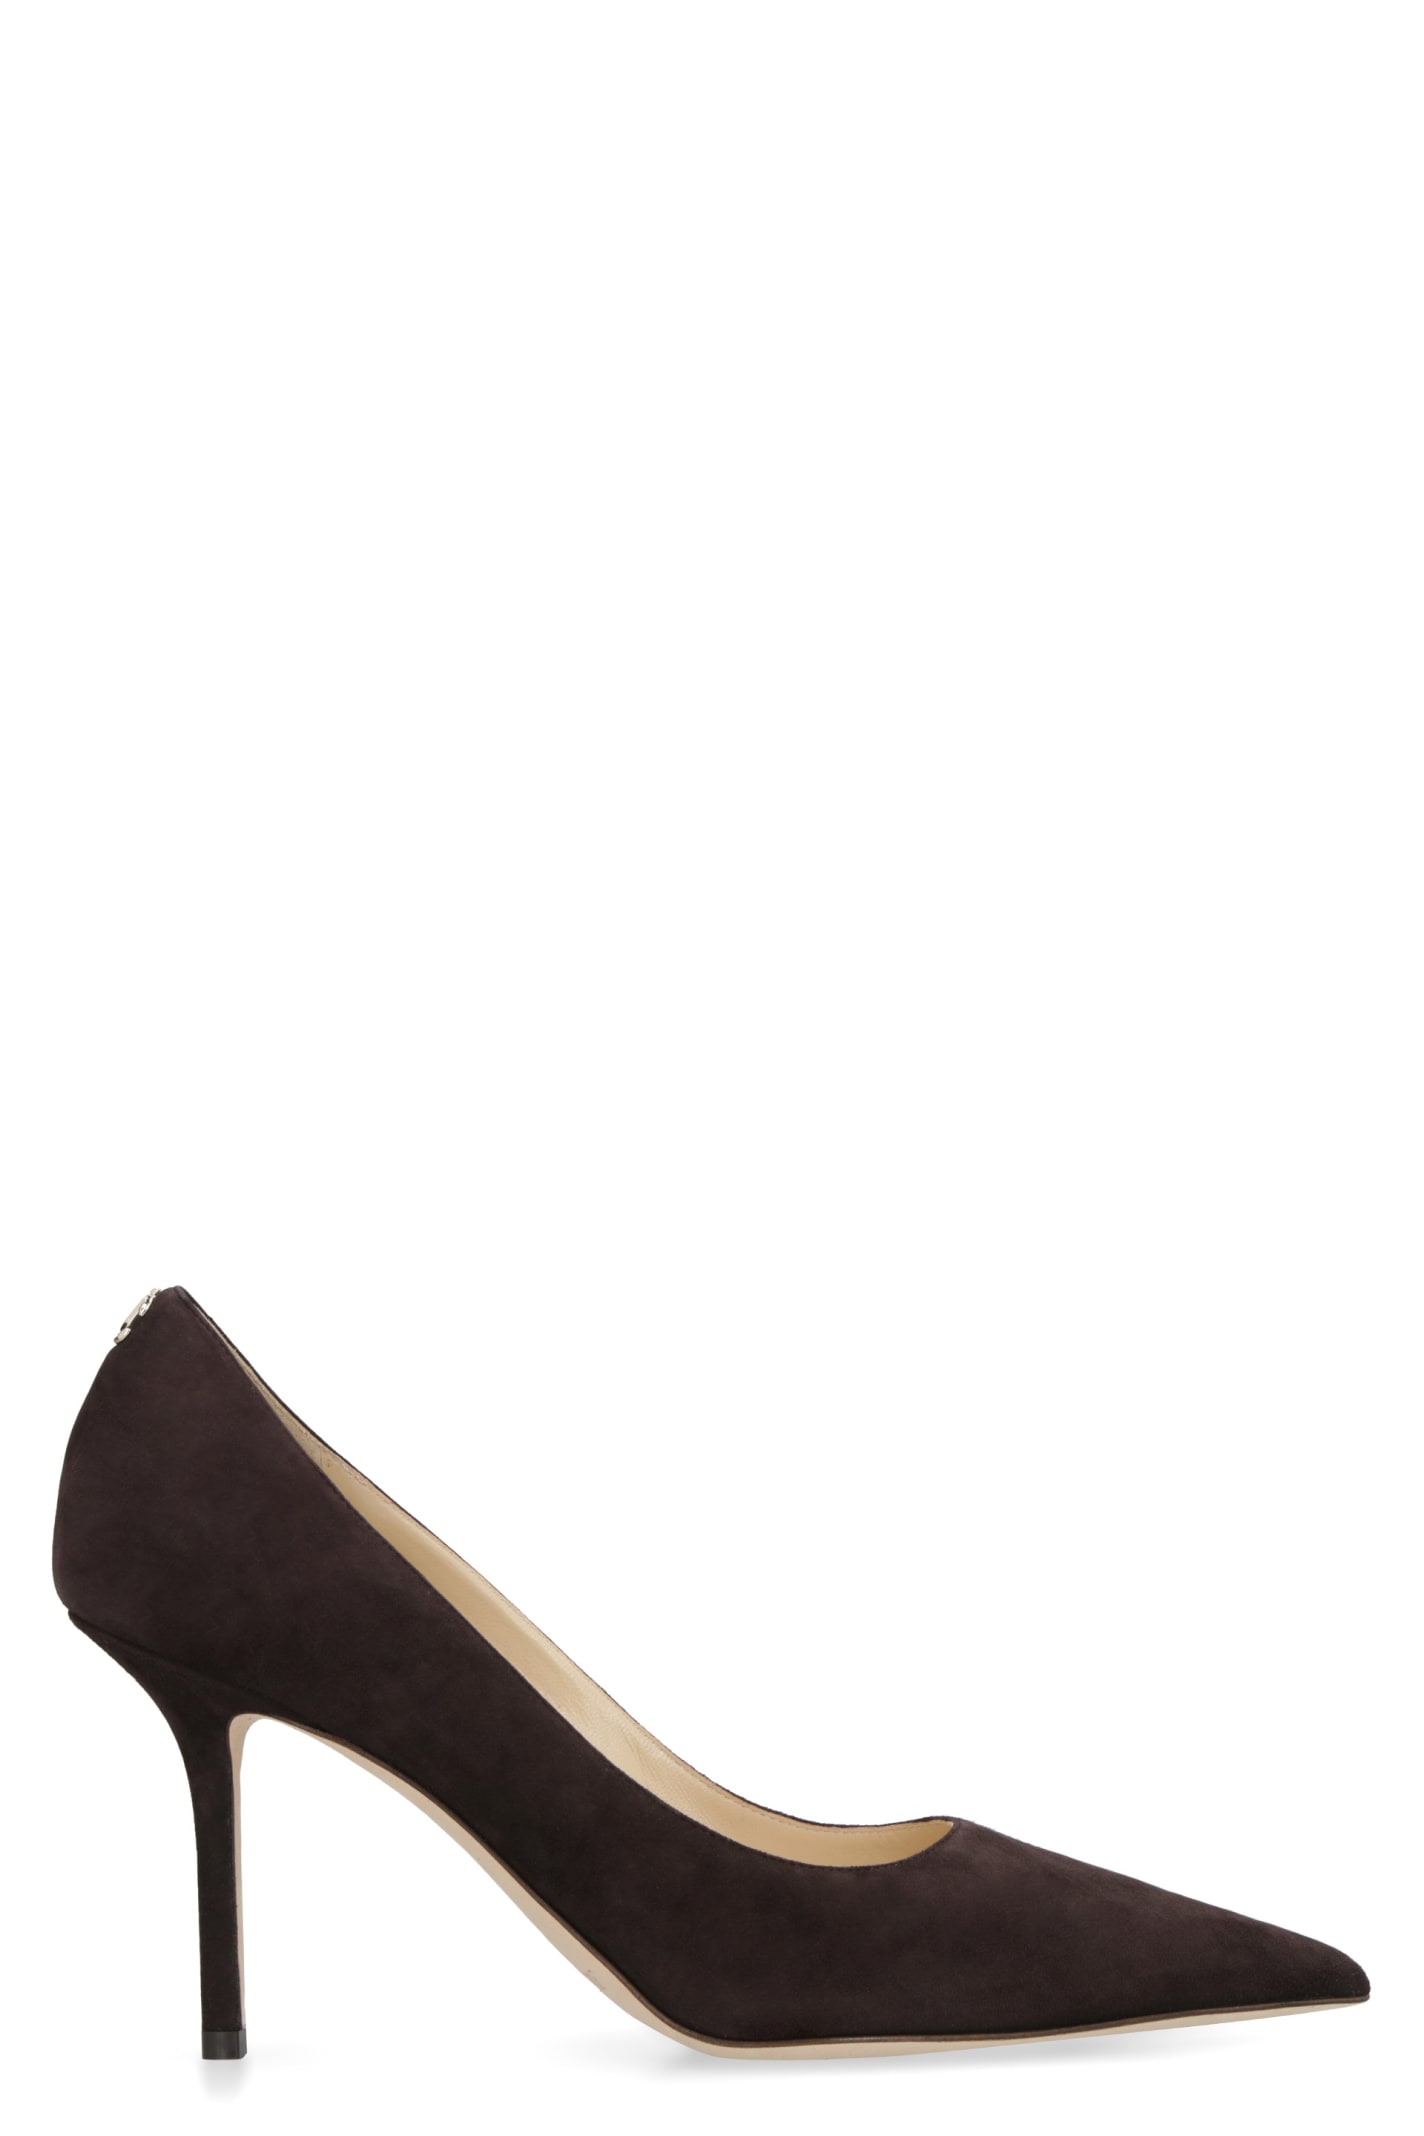 JIMMY CHOO LOVE 85 SUEDE POINTY-TOE PUMPS